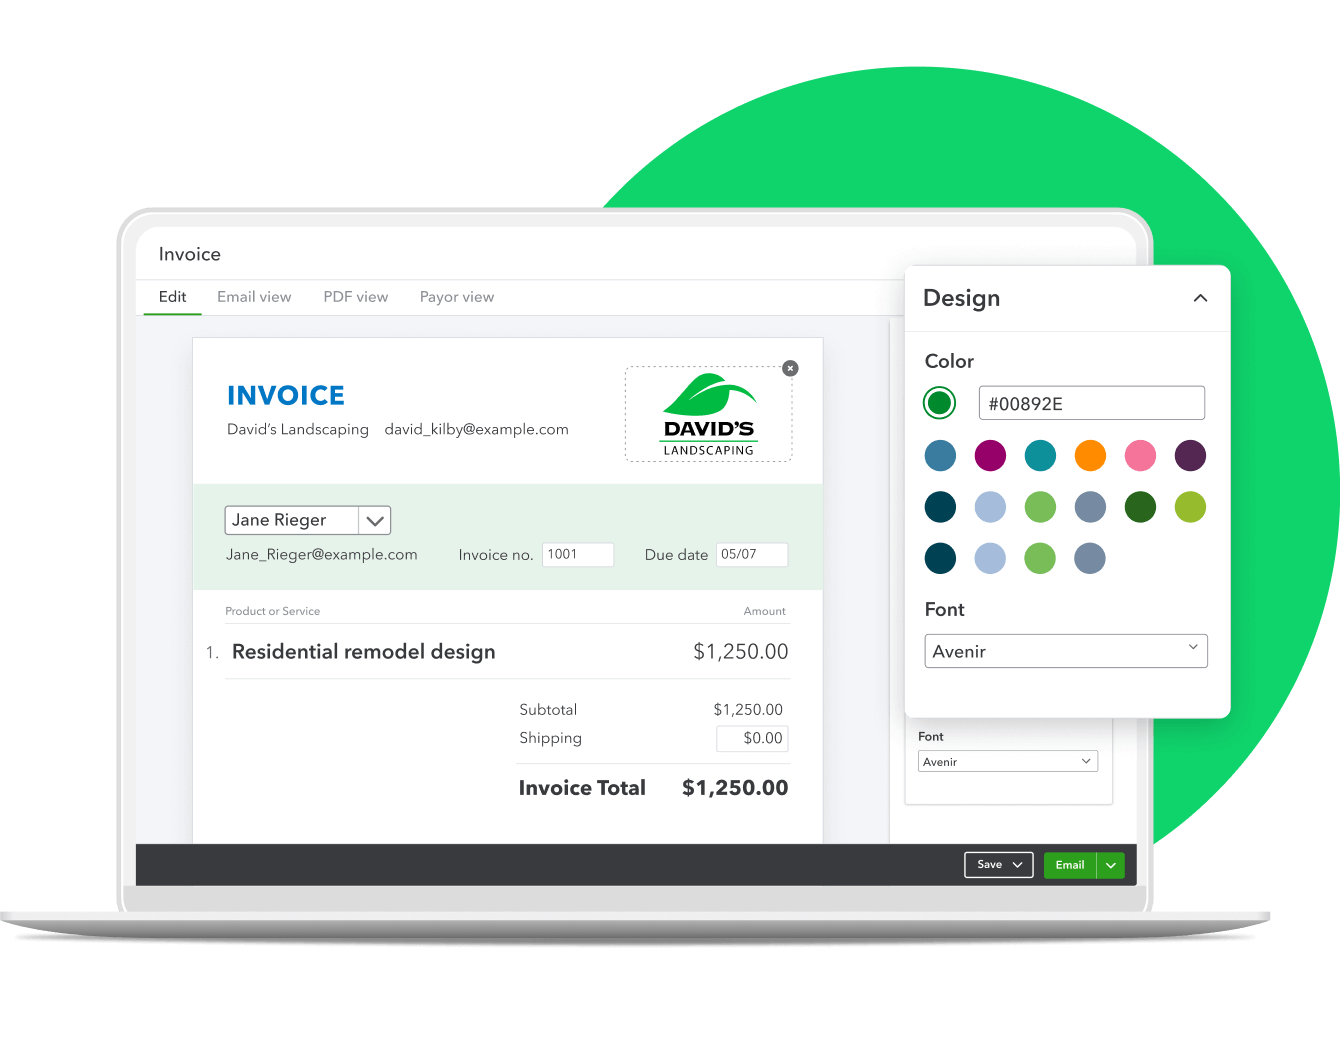 Customize your invoice to match your brand